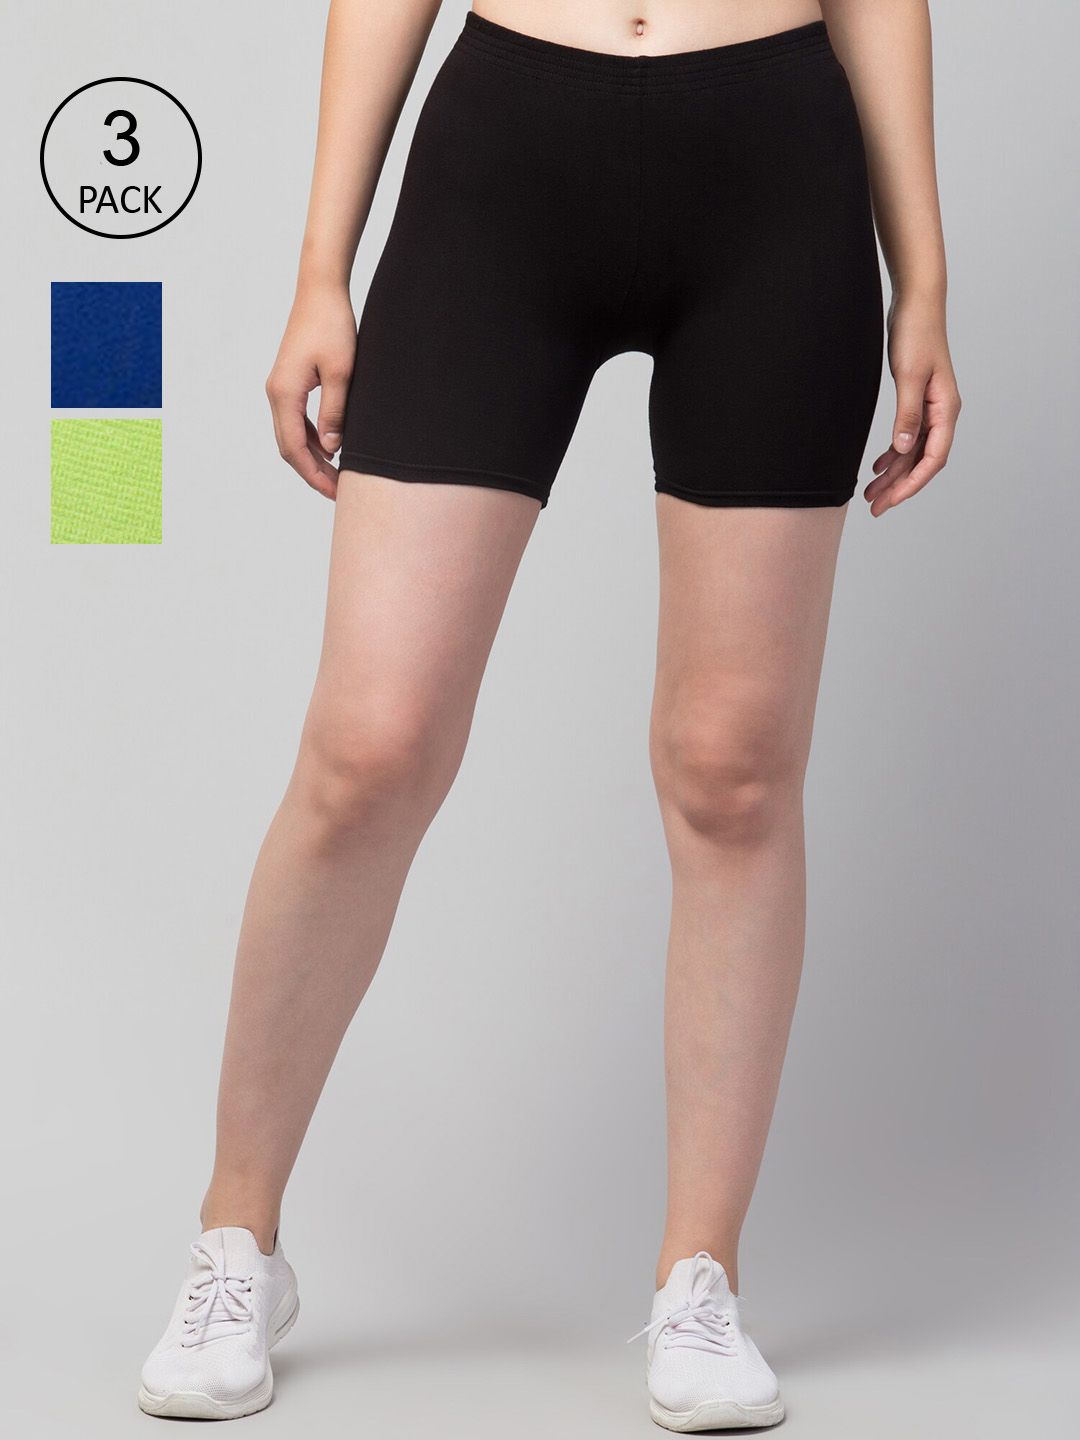 Apraa & Parma Women Black Slim Fit Cycling Hot Pants Shorts Price in India